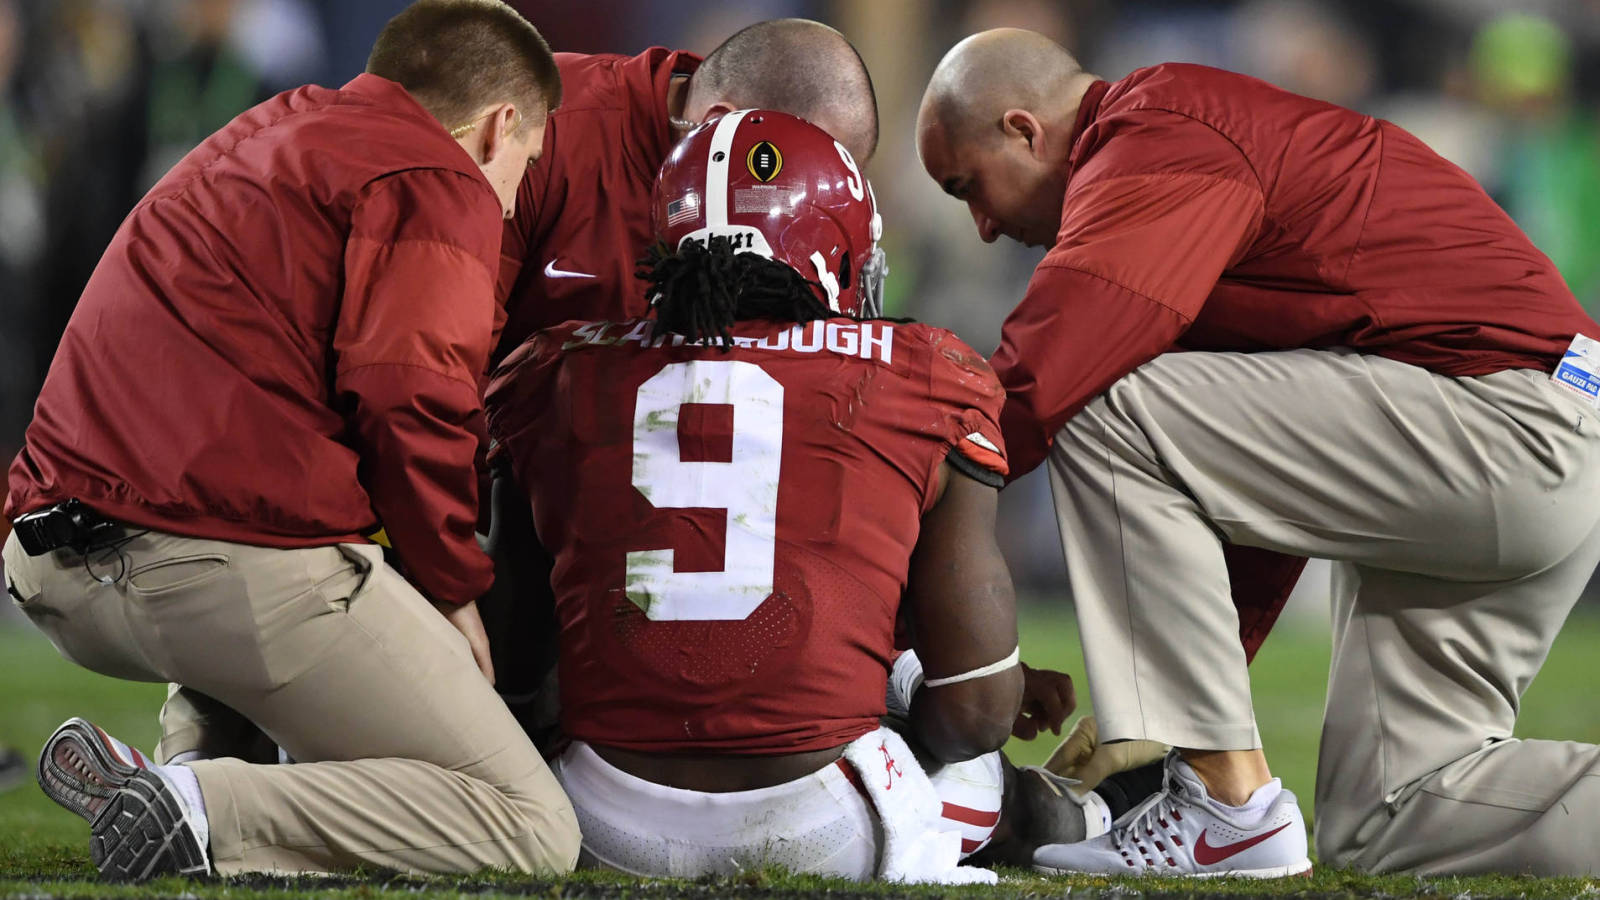 Report: Scarbrough suffered broken leg in loss to Clemson